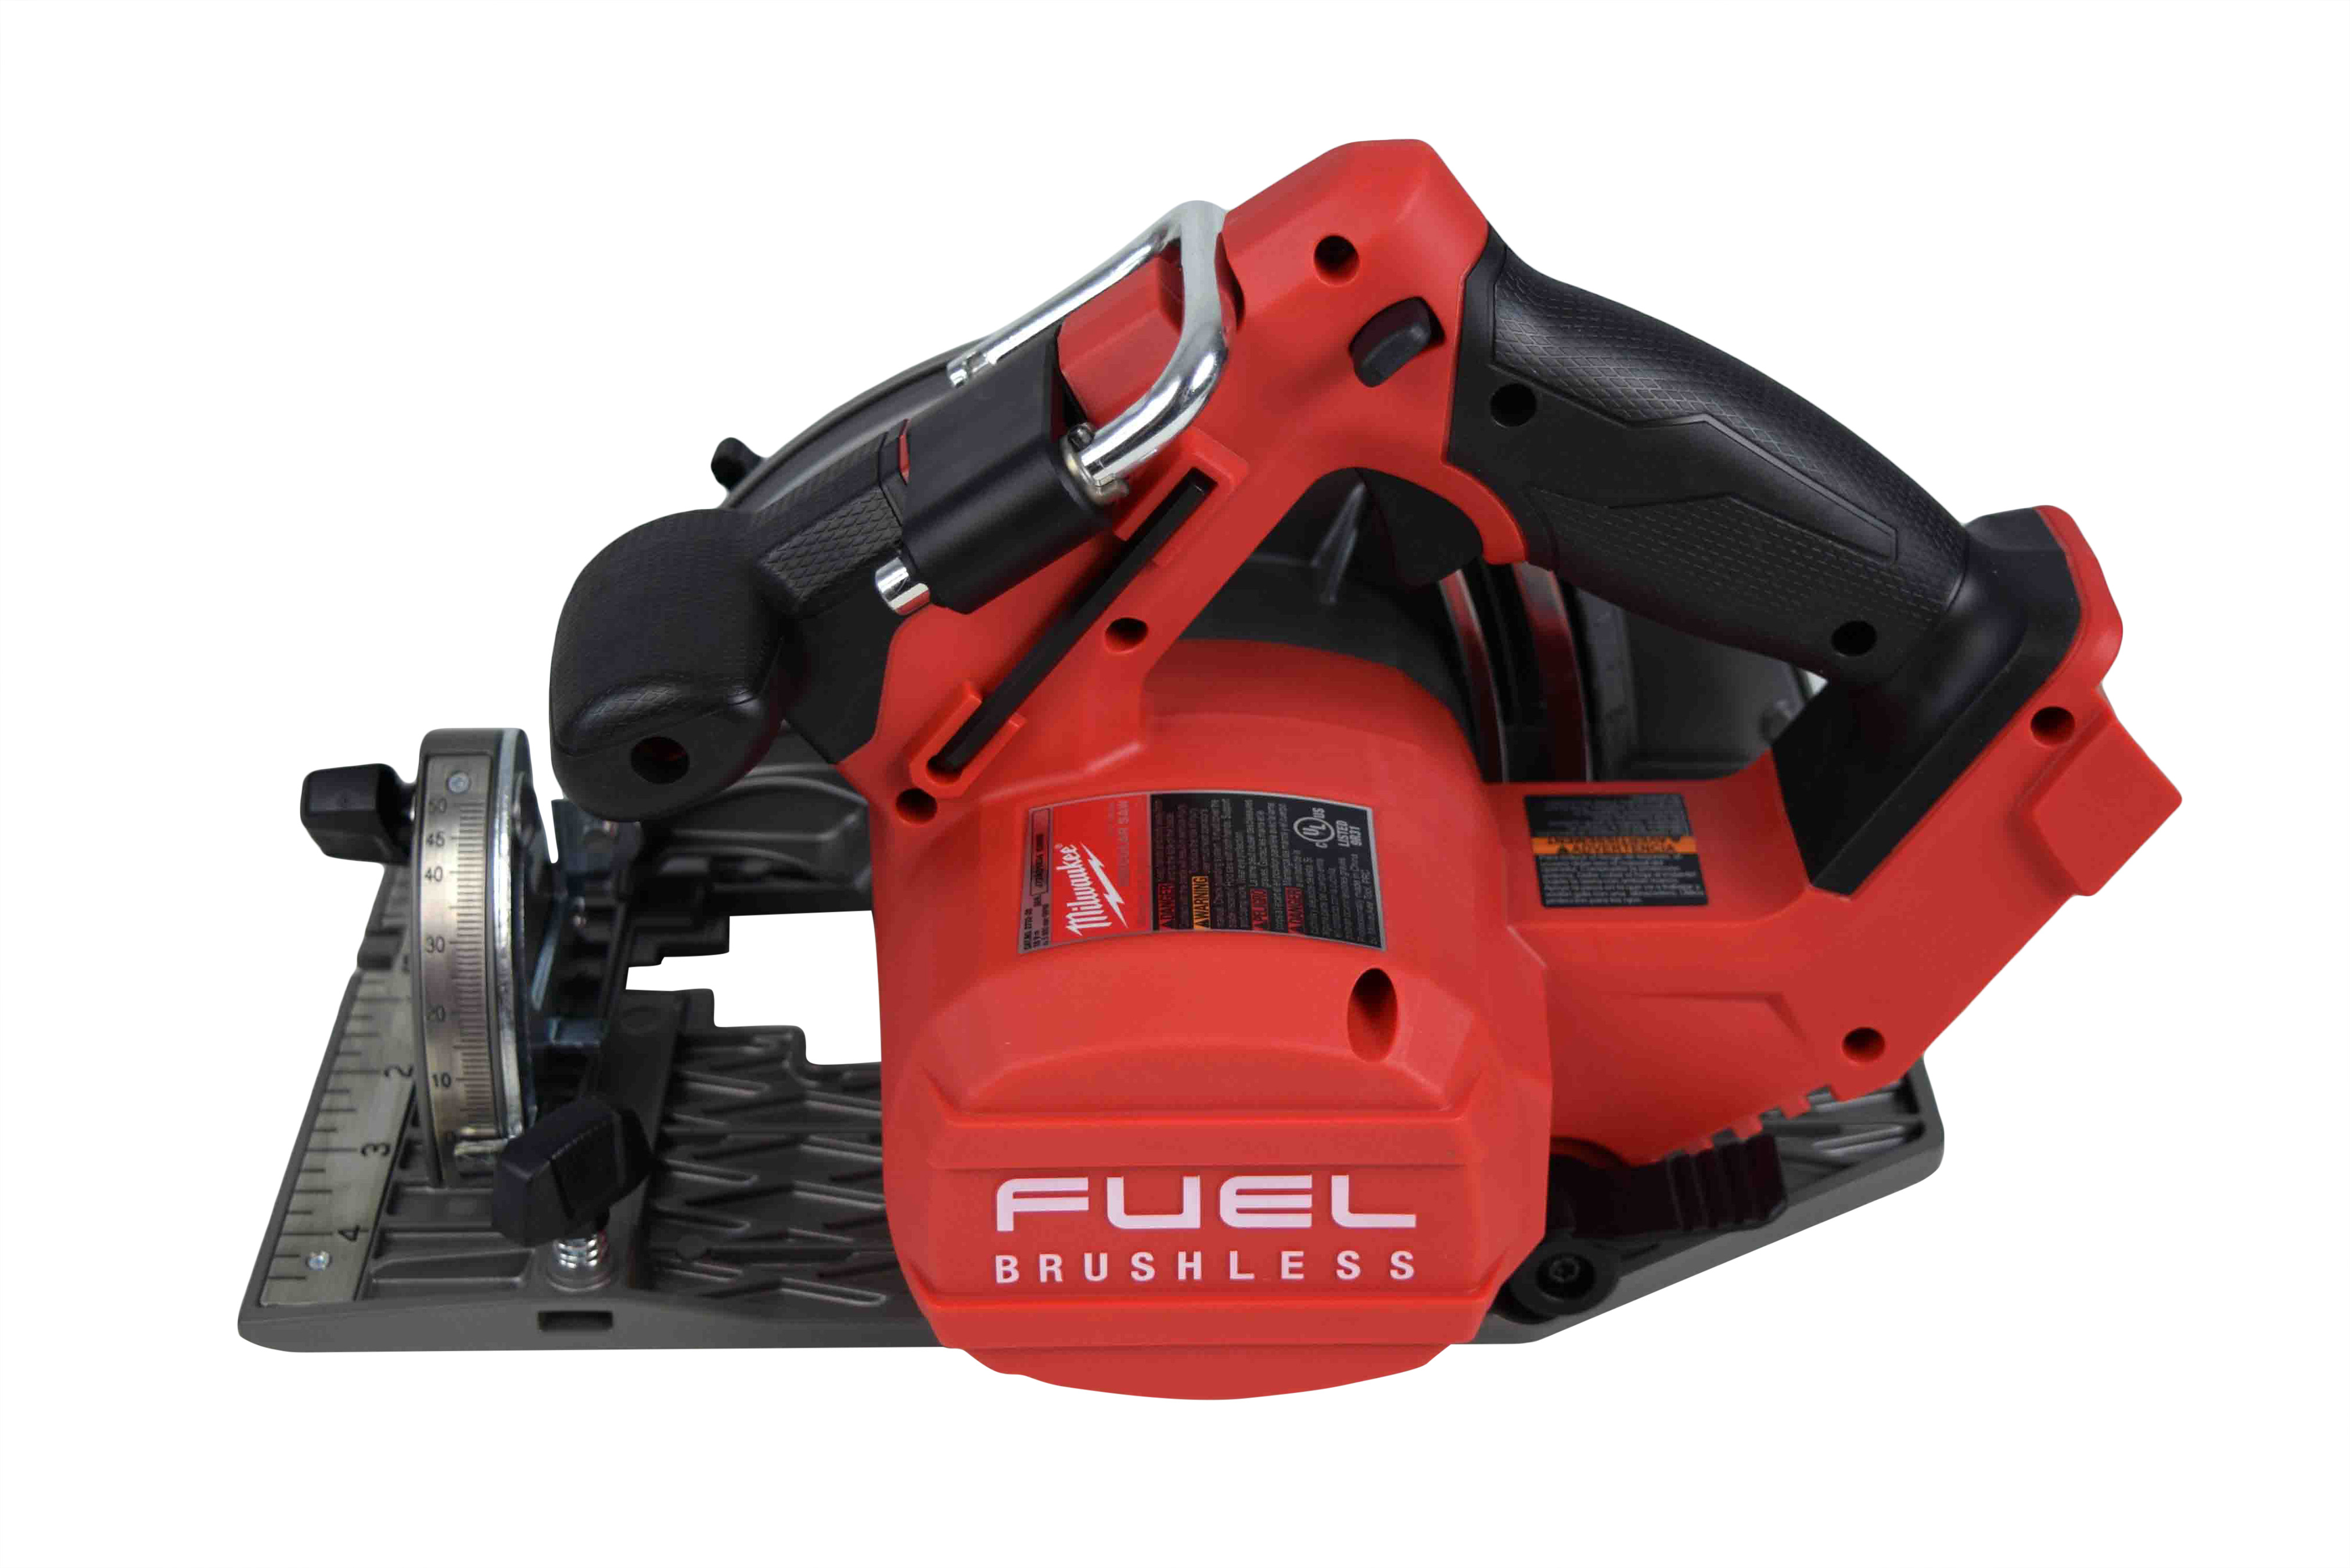 Milwaukee M18 18V Fuel 7-1/4" Circular Saw Kit 2732-21HD with 12Ah Battery, Charger, Contractor Tool Bag - image 6 of 9